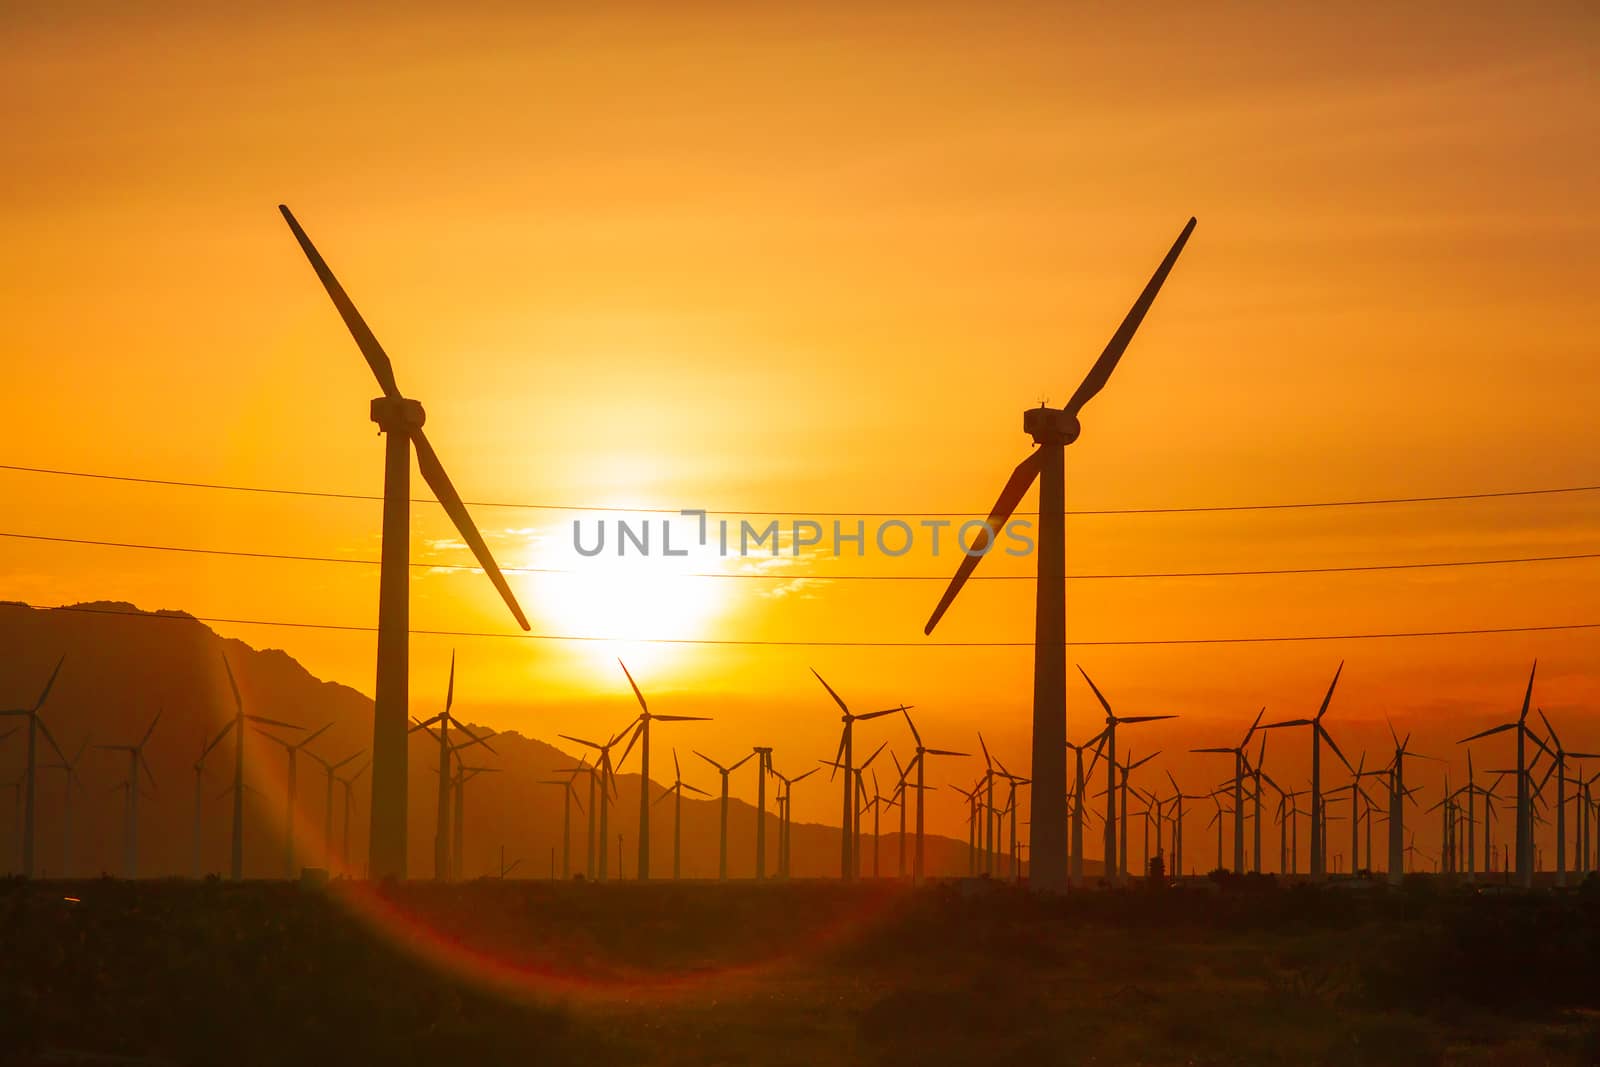 Silhouetted Wind Turbines Over Dramatic Sunset Sky.